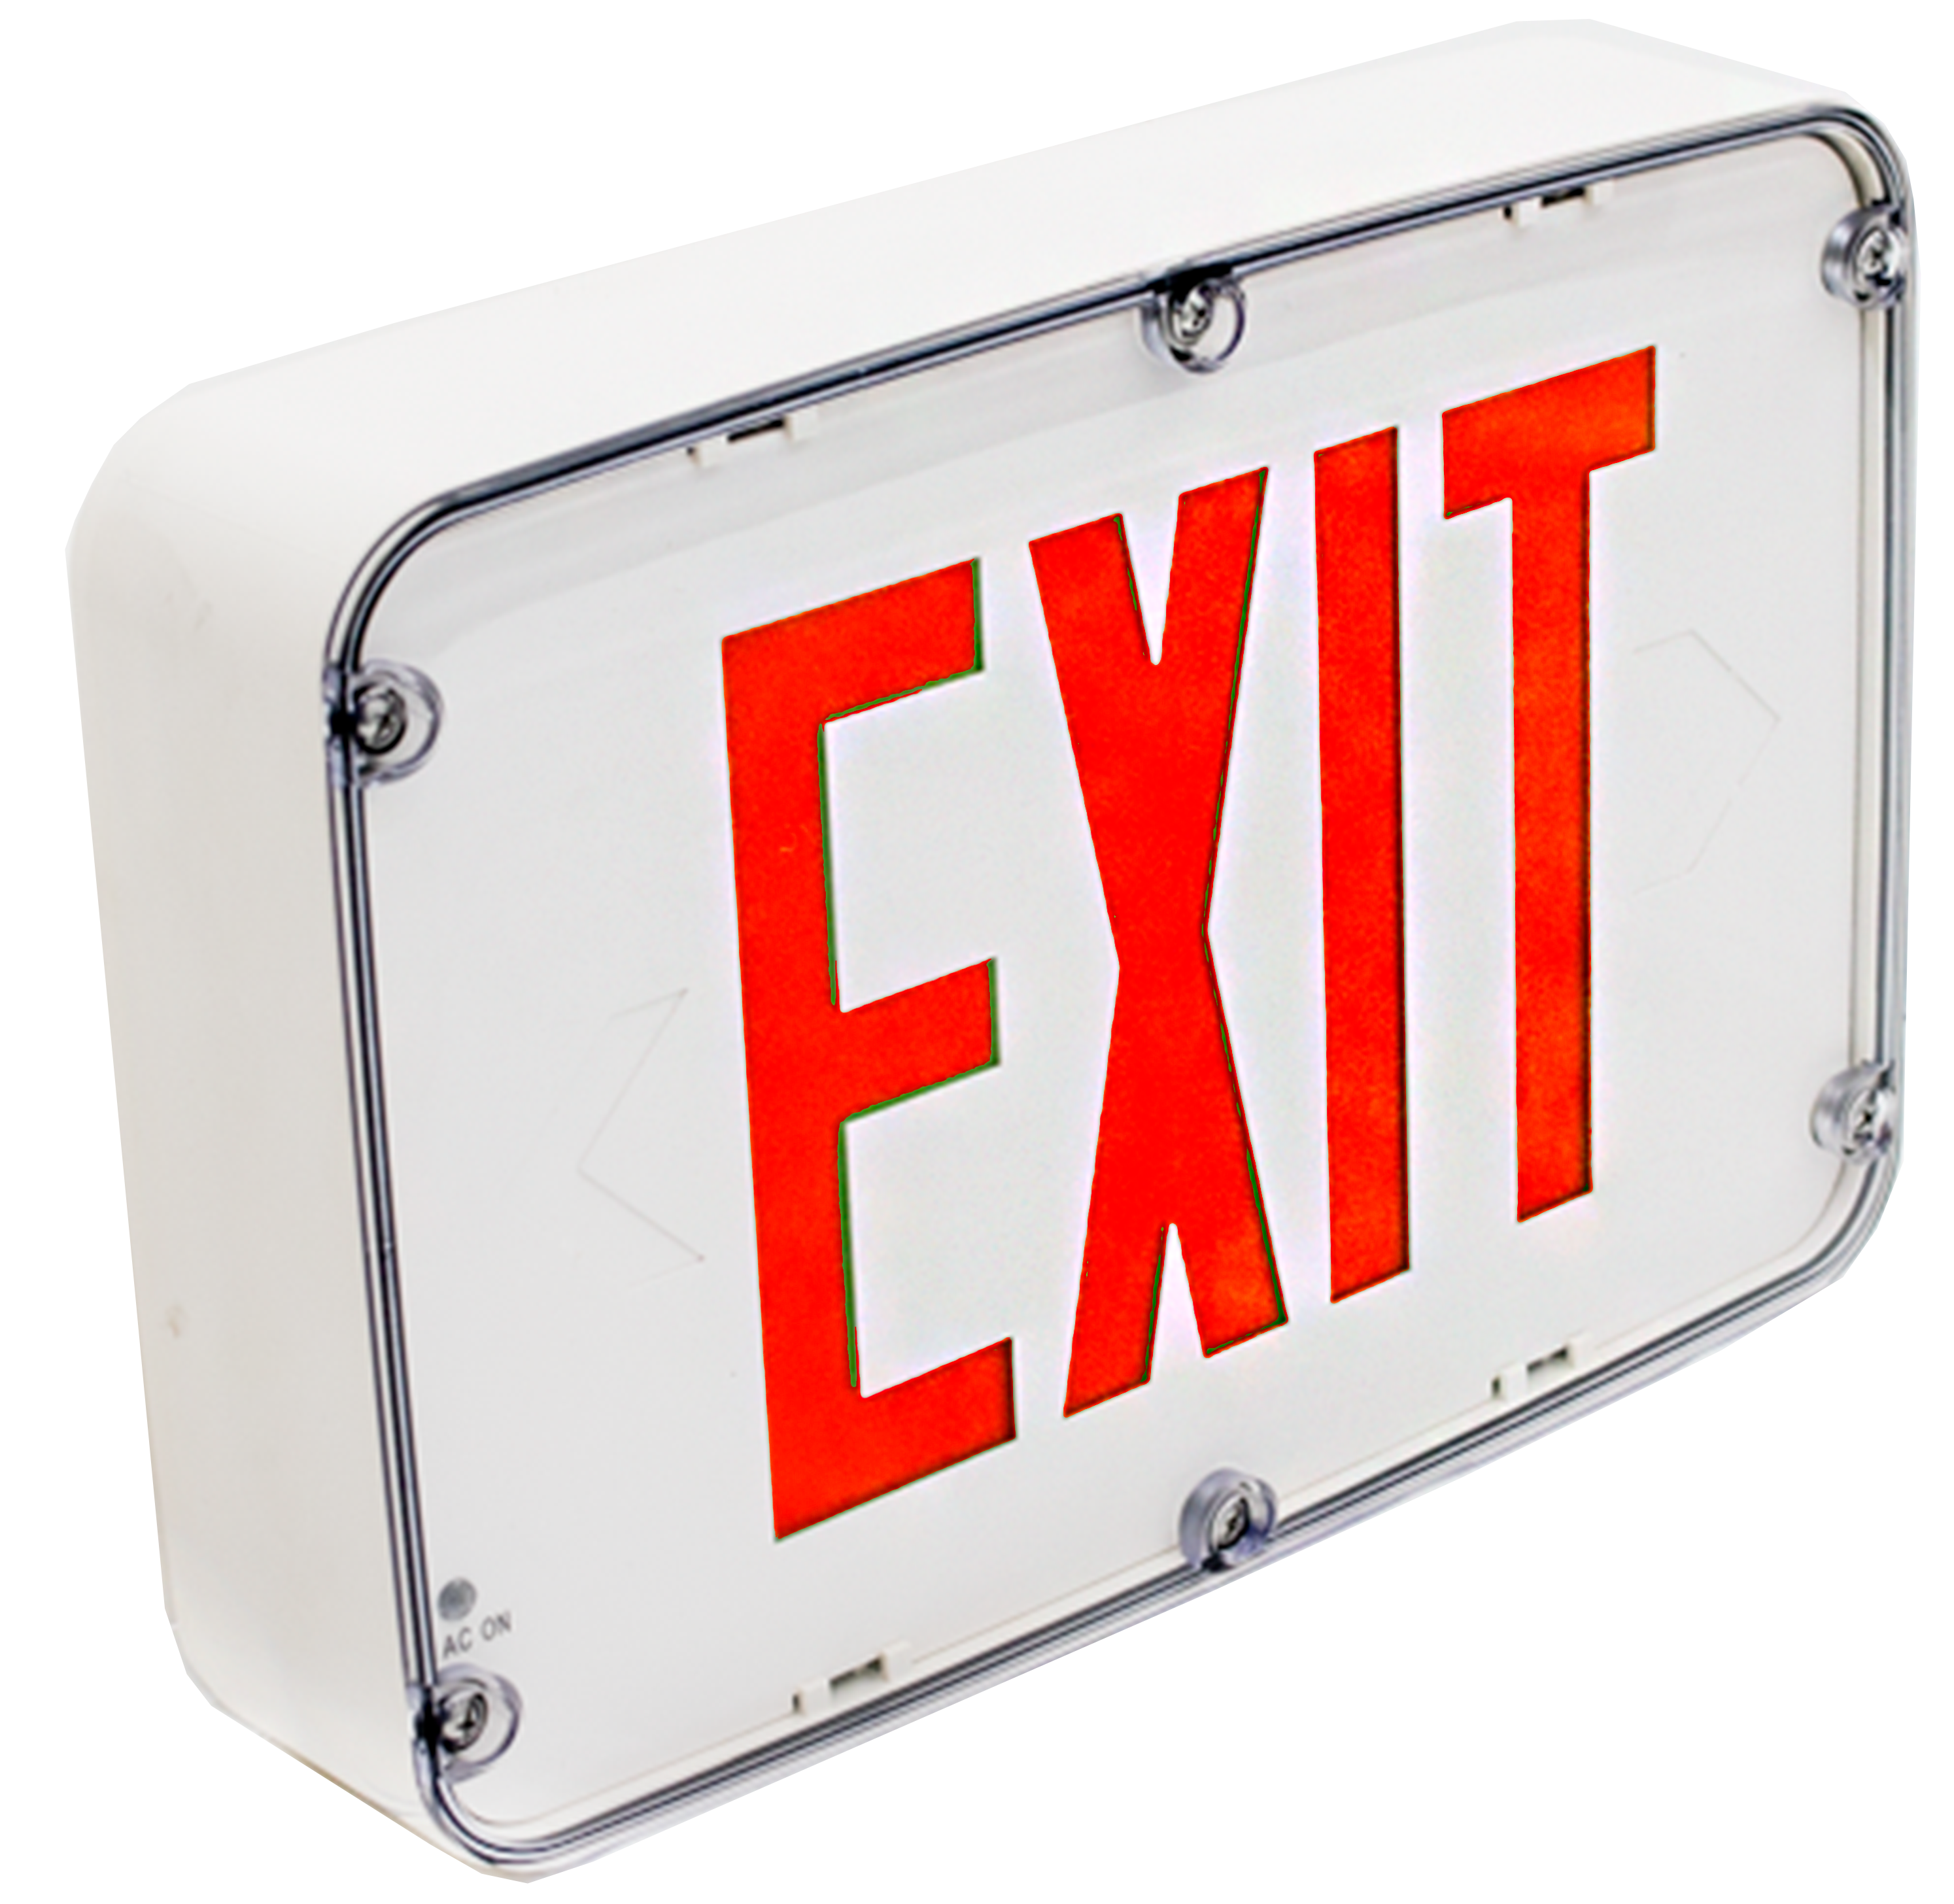 Westgate XTN4X-2RW Nema 4x Rated LED Exit Sign, Double Face, Red Letters, White Panel